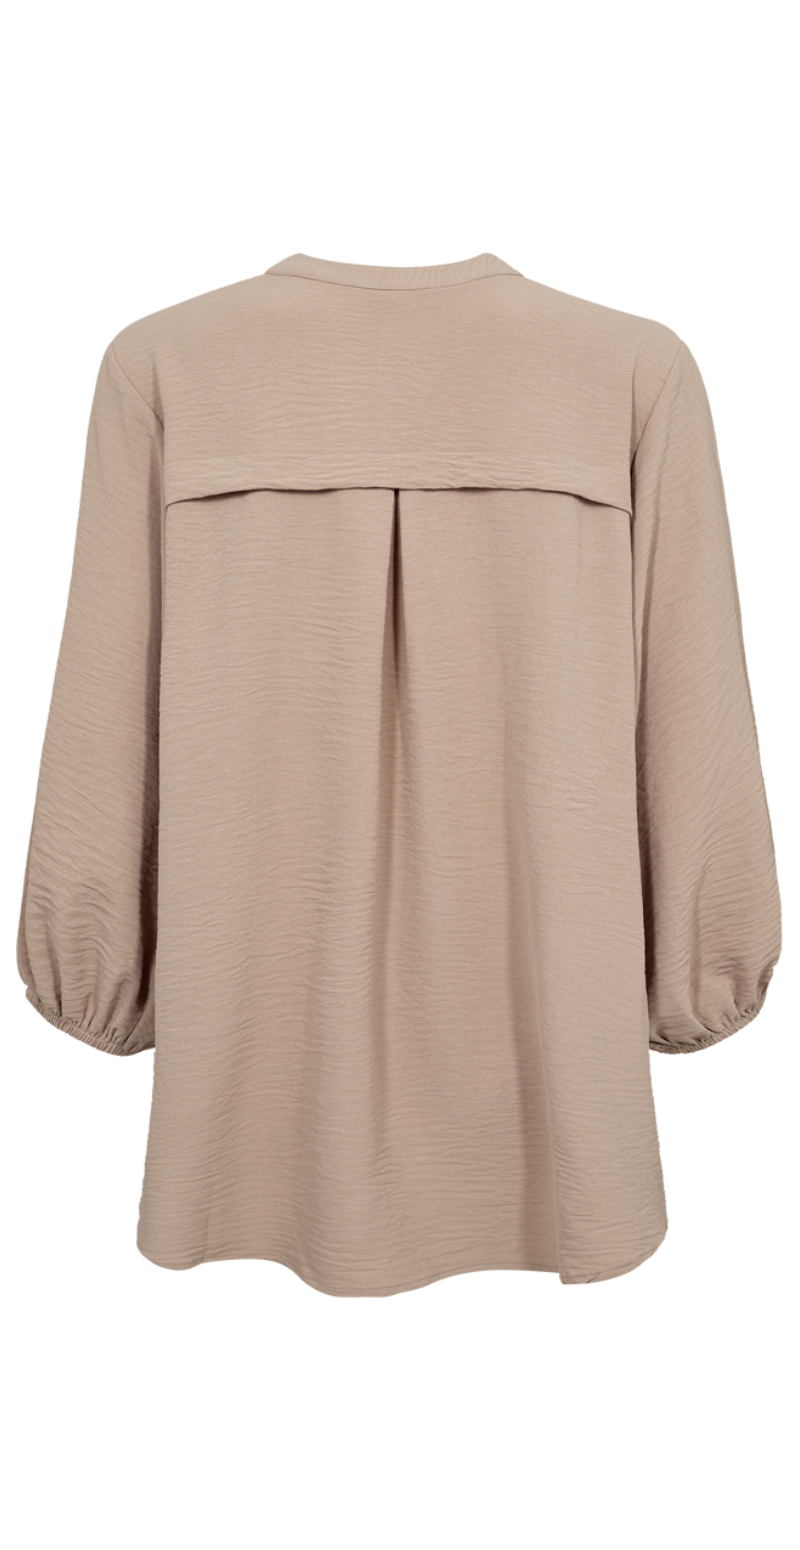 FreeQuent bluse beige